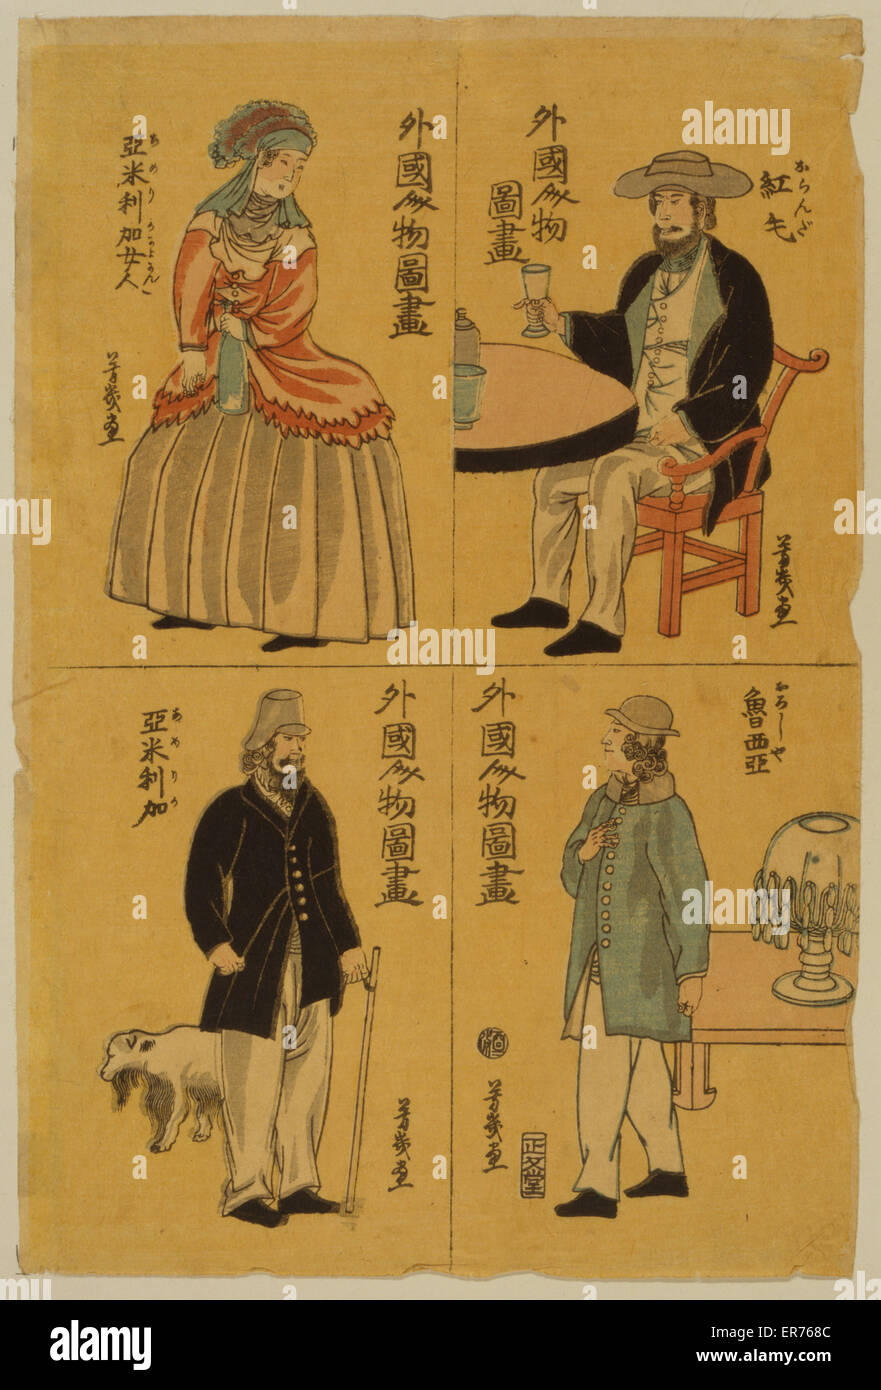 Portraits of foreigners - Dutch, Russian, American lady, American. Japanese print shows typical examples of Dutch, Russian, and American men, and an American woman. Date 1861. Stock Photo